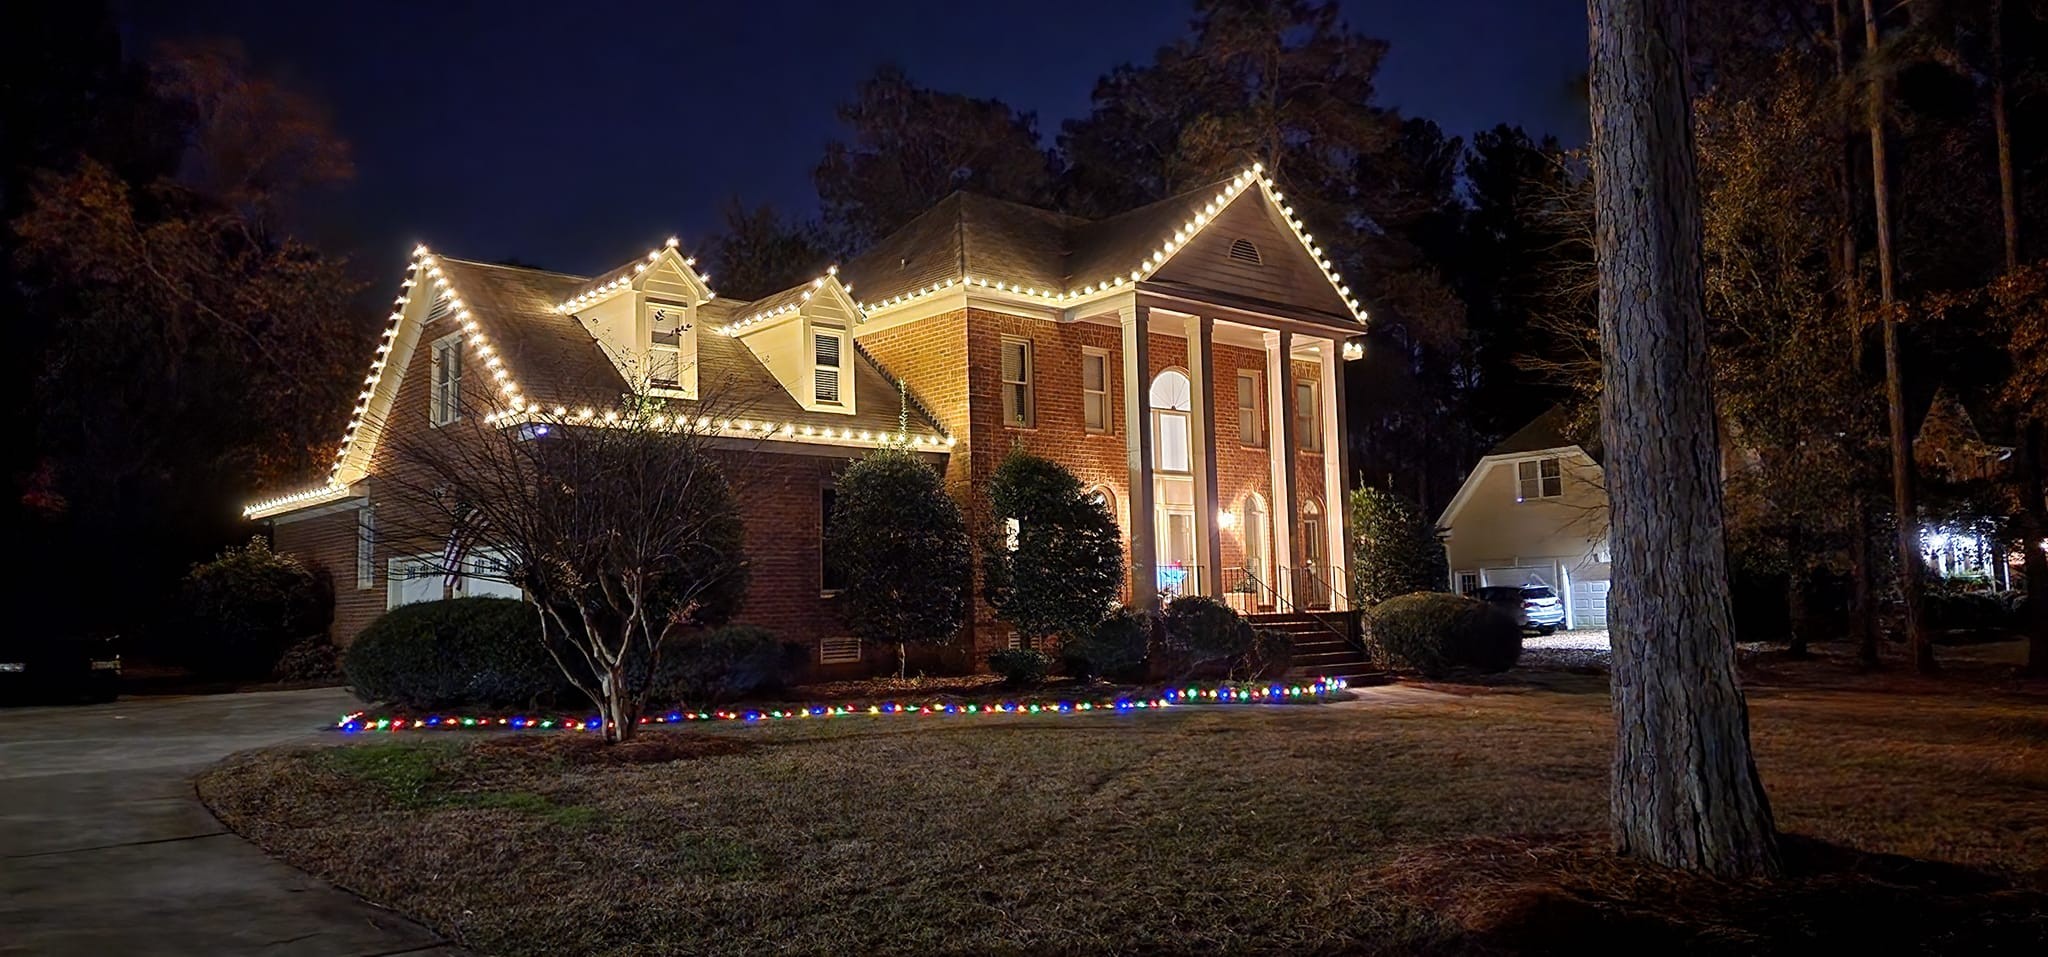 Christmas Light Installation for Muddy Paws Landscaping in Lugoff, SC